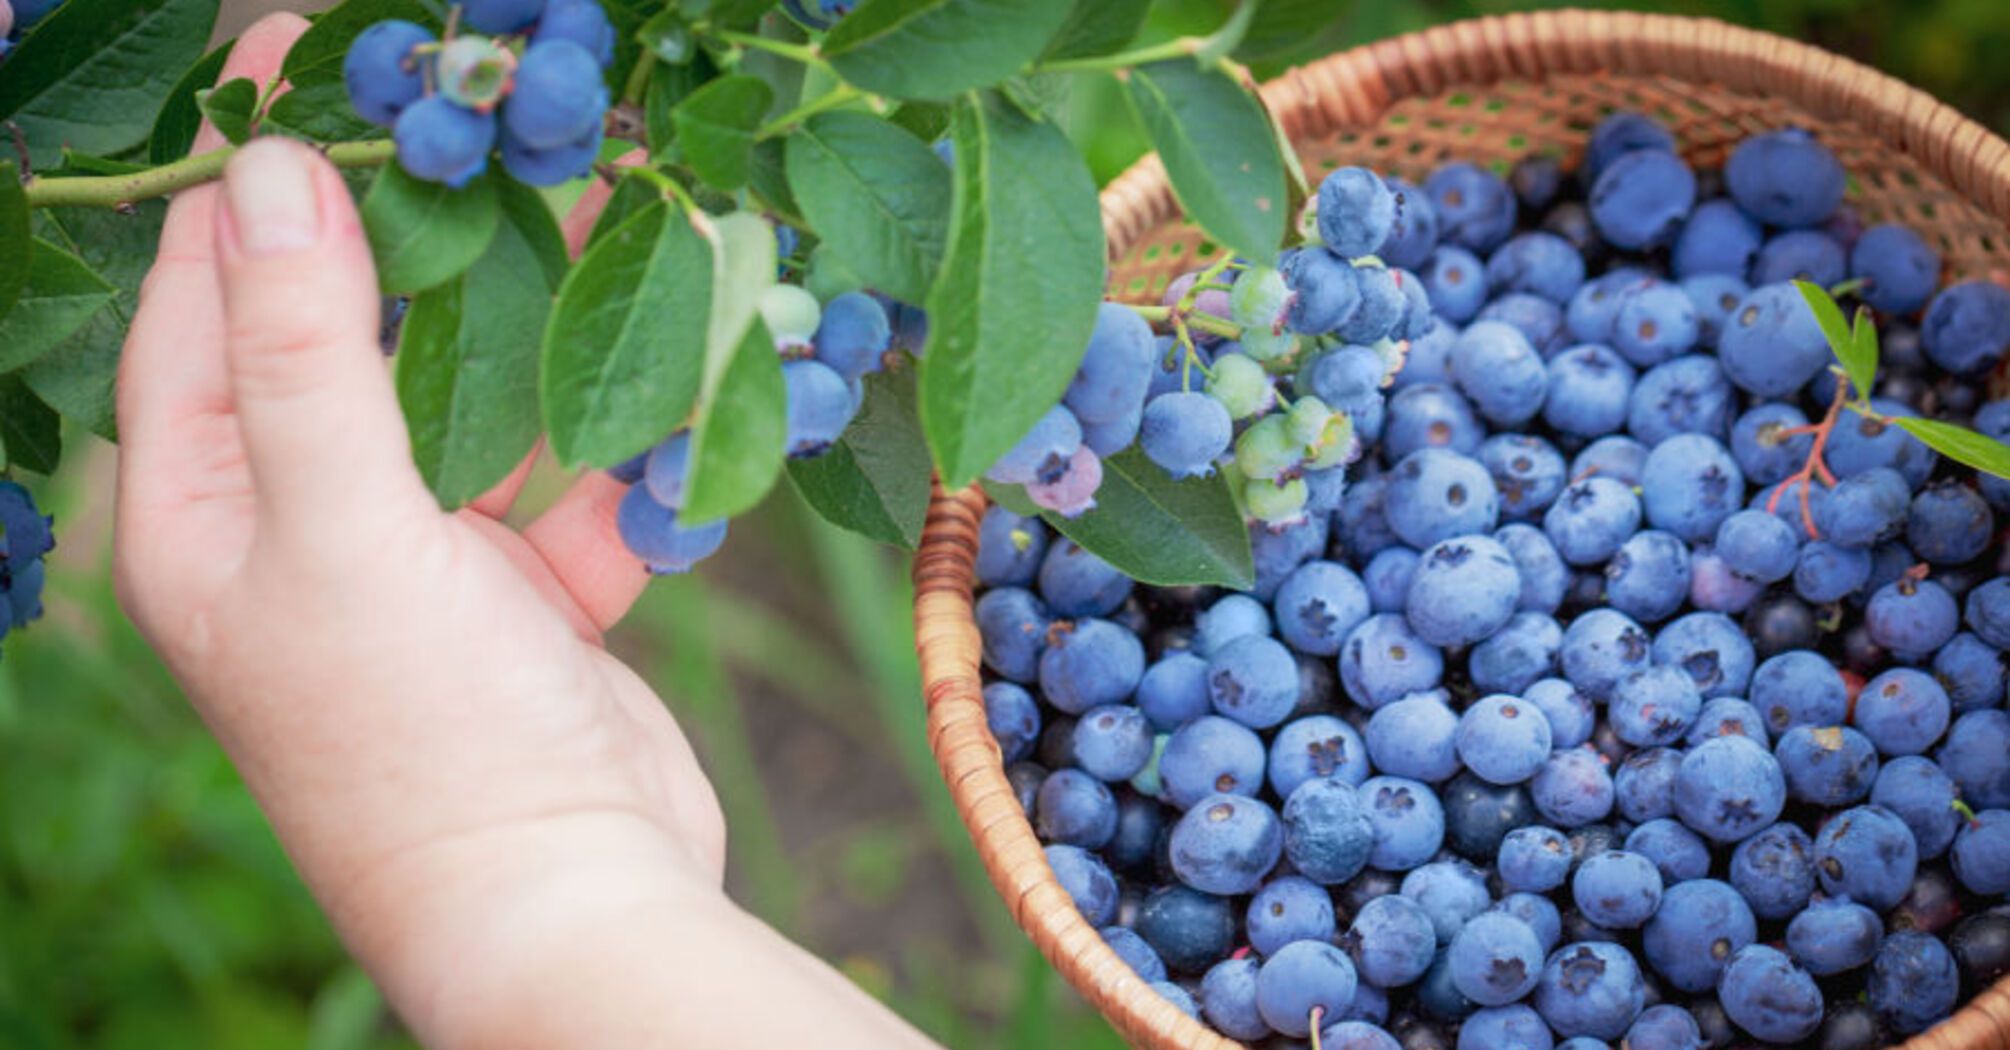 How to fertilize blueberries